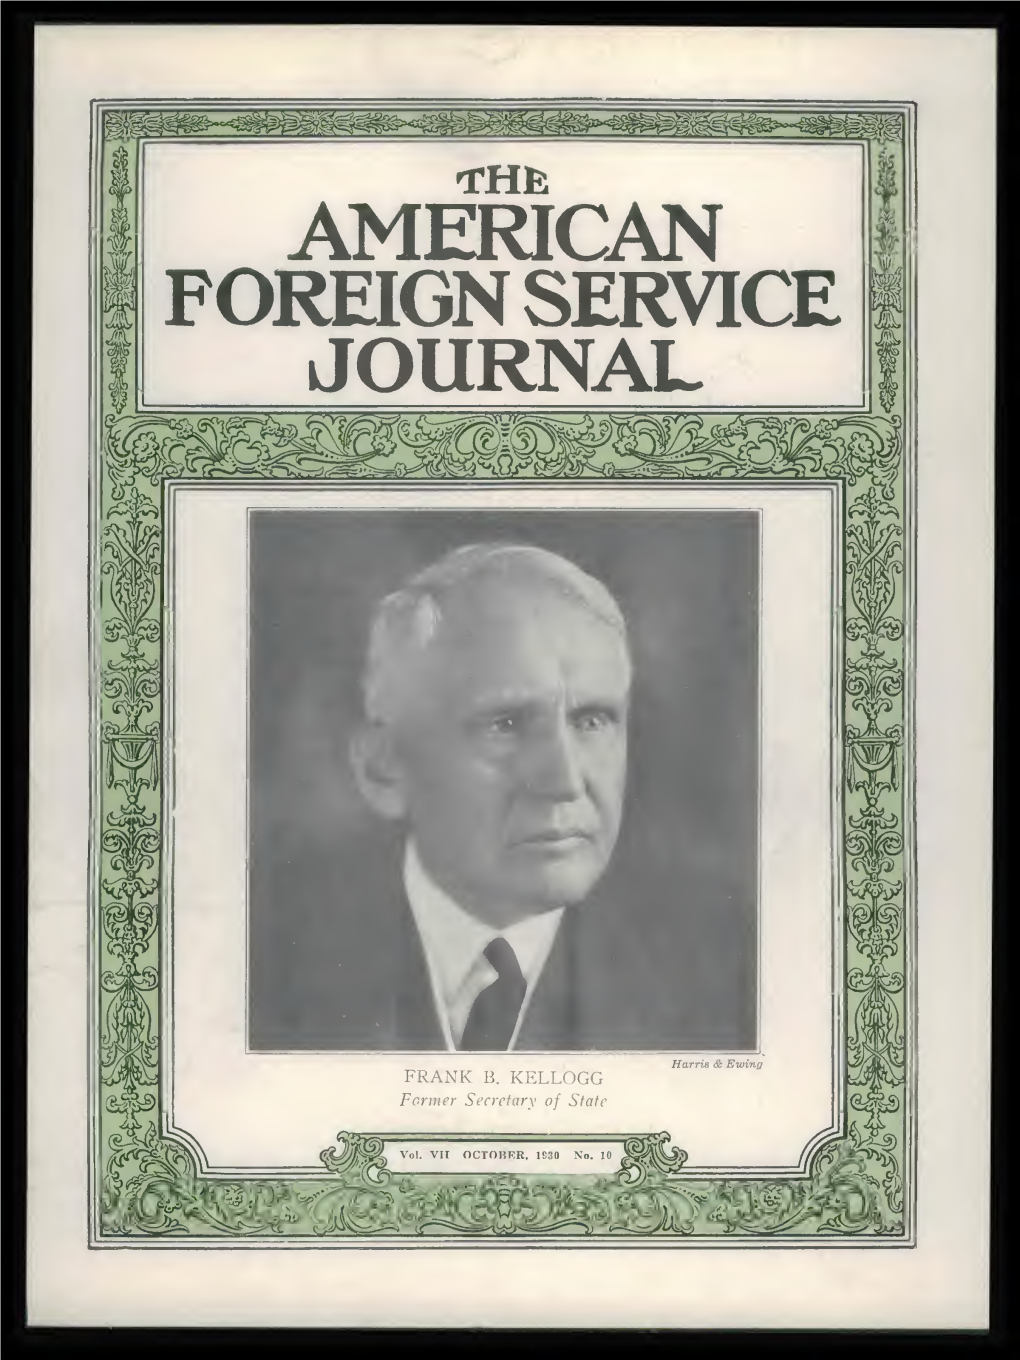 The Foreign Service Journal, October 1930